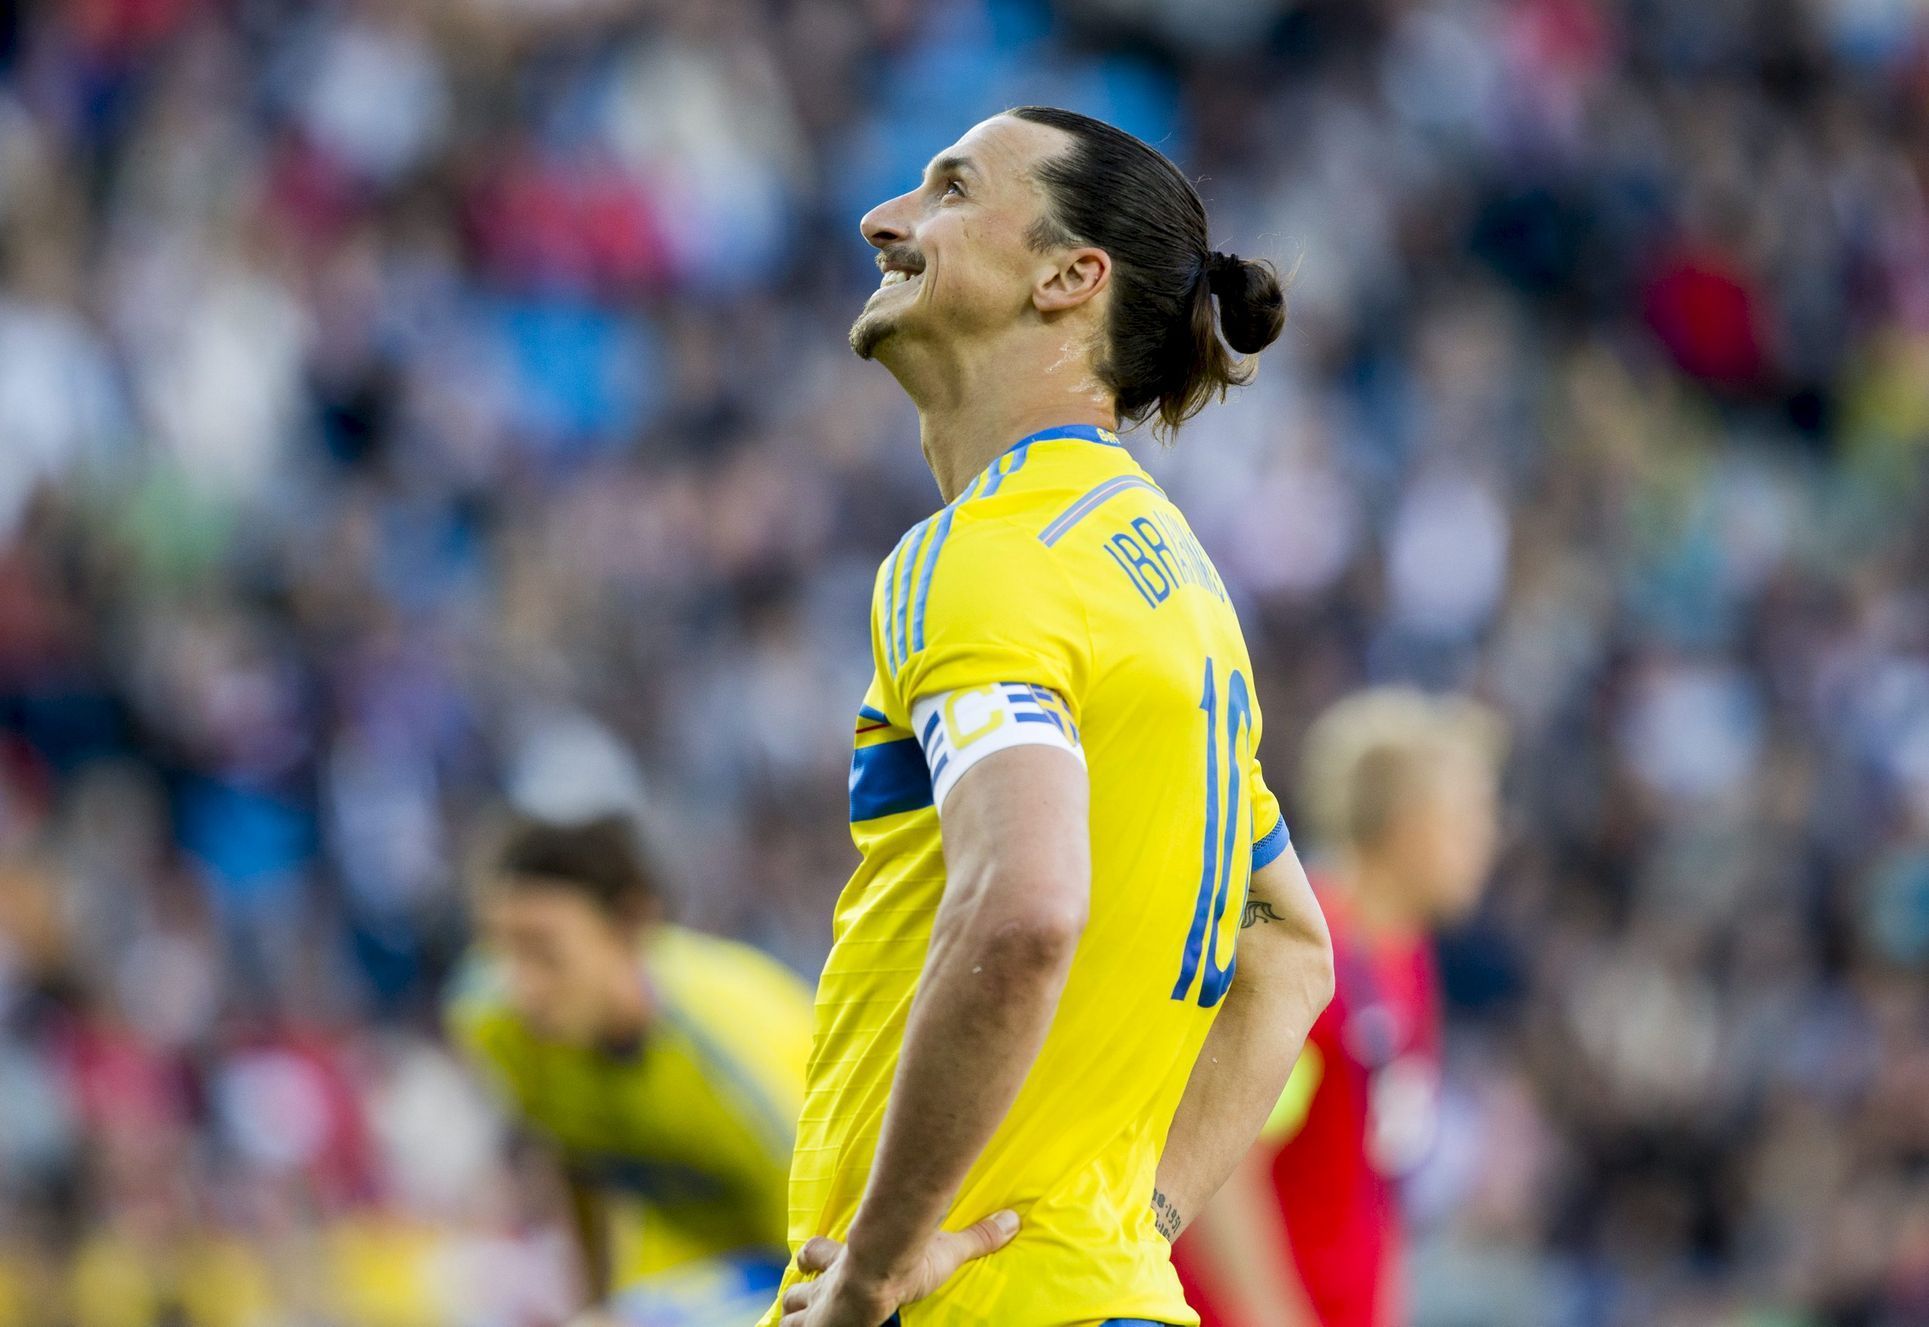 Sweden's captain Ibrahimovic reacts during an international friendly soccer match between Norway and Sweden at Ullevaal Stadium in Oslo